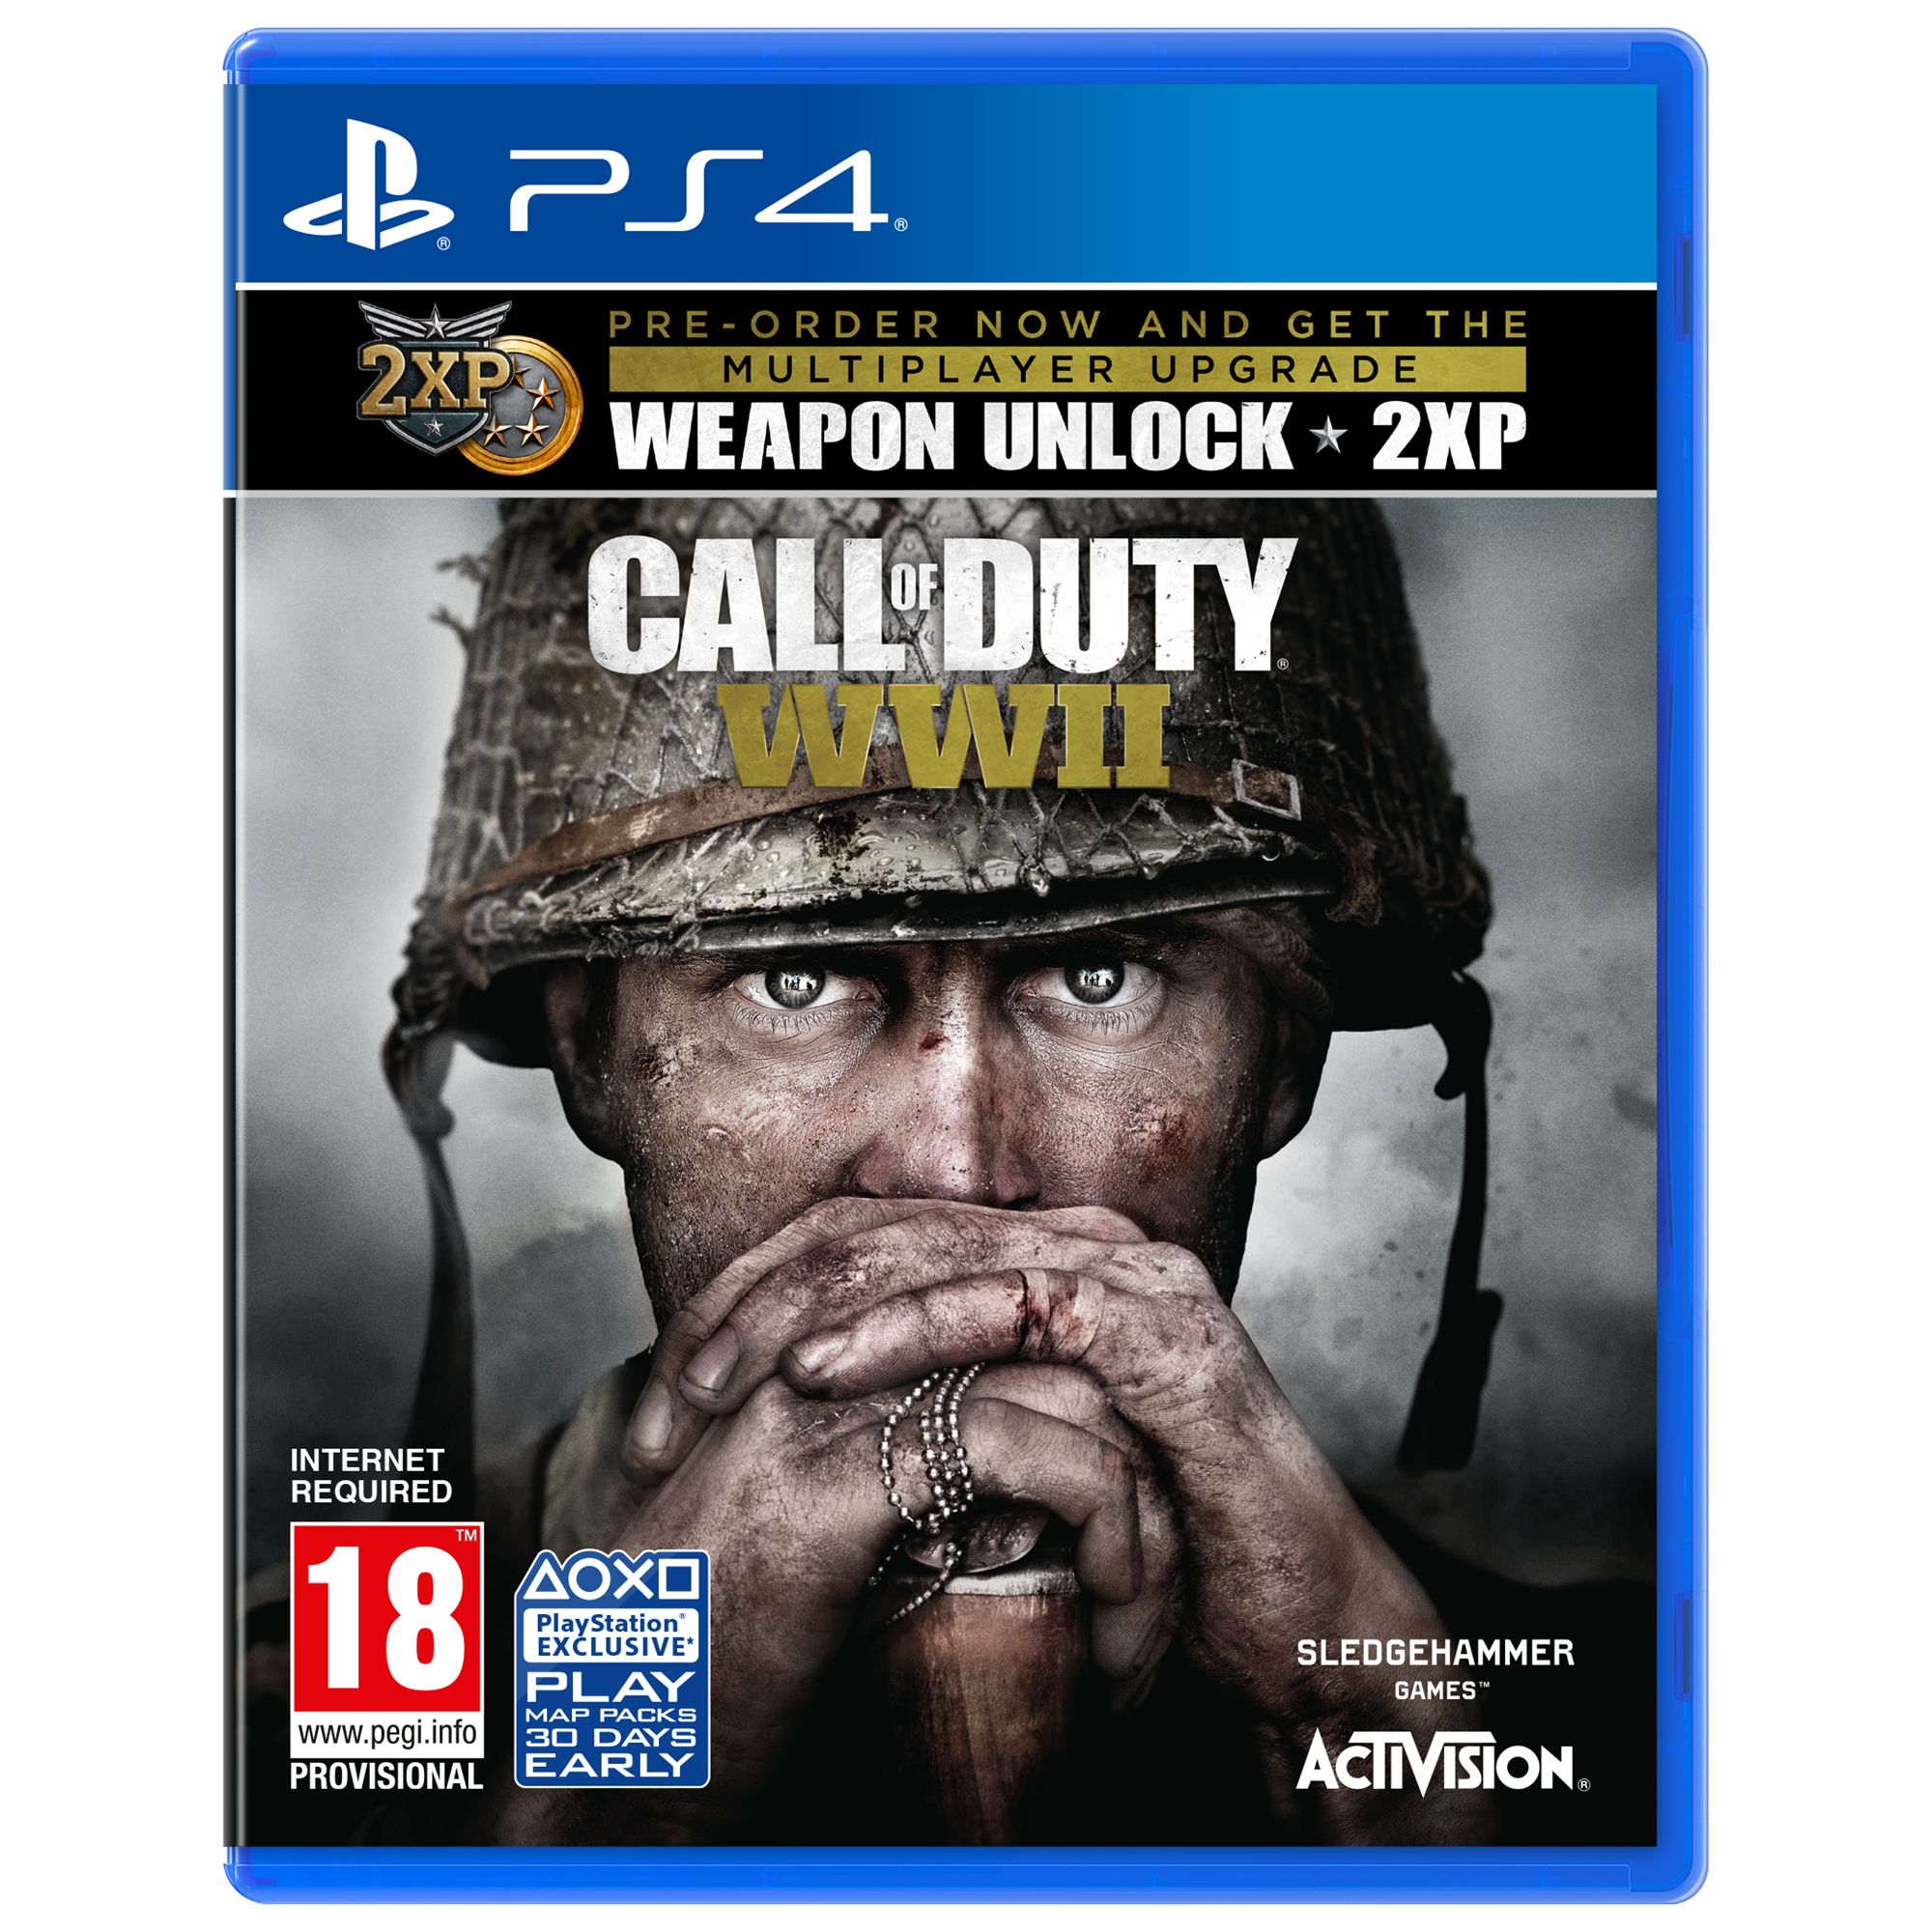 PlayStation 4 Slim Console, 500GB, DualShock 4 Controller and Call of Duty: WWII game, with